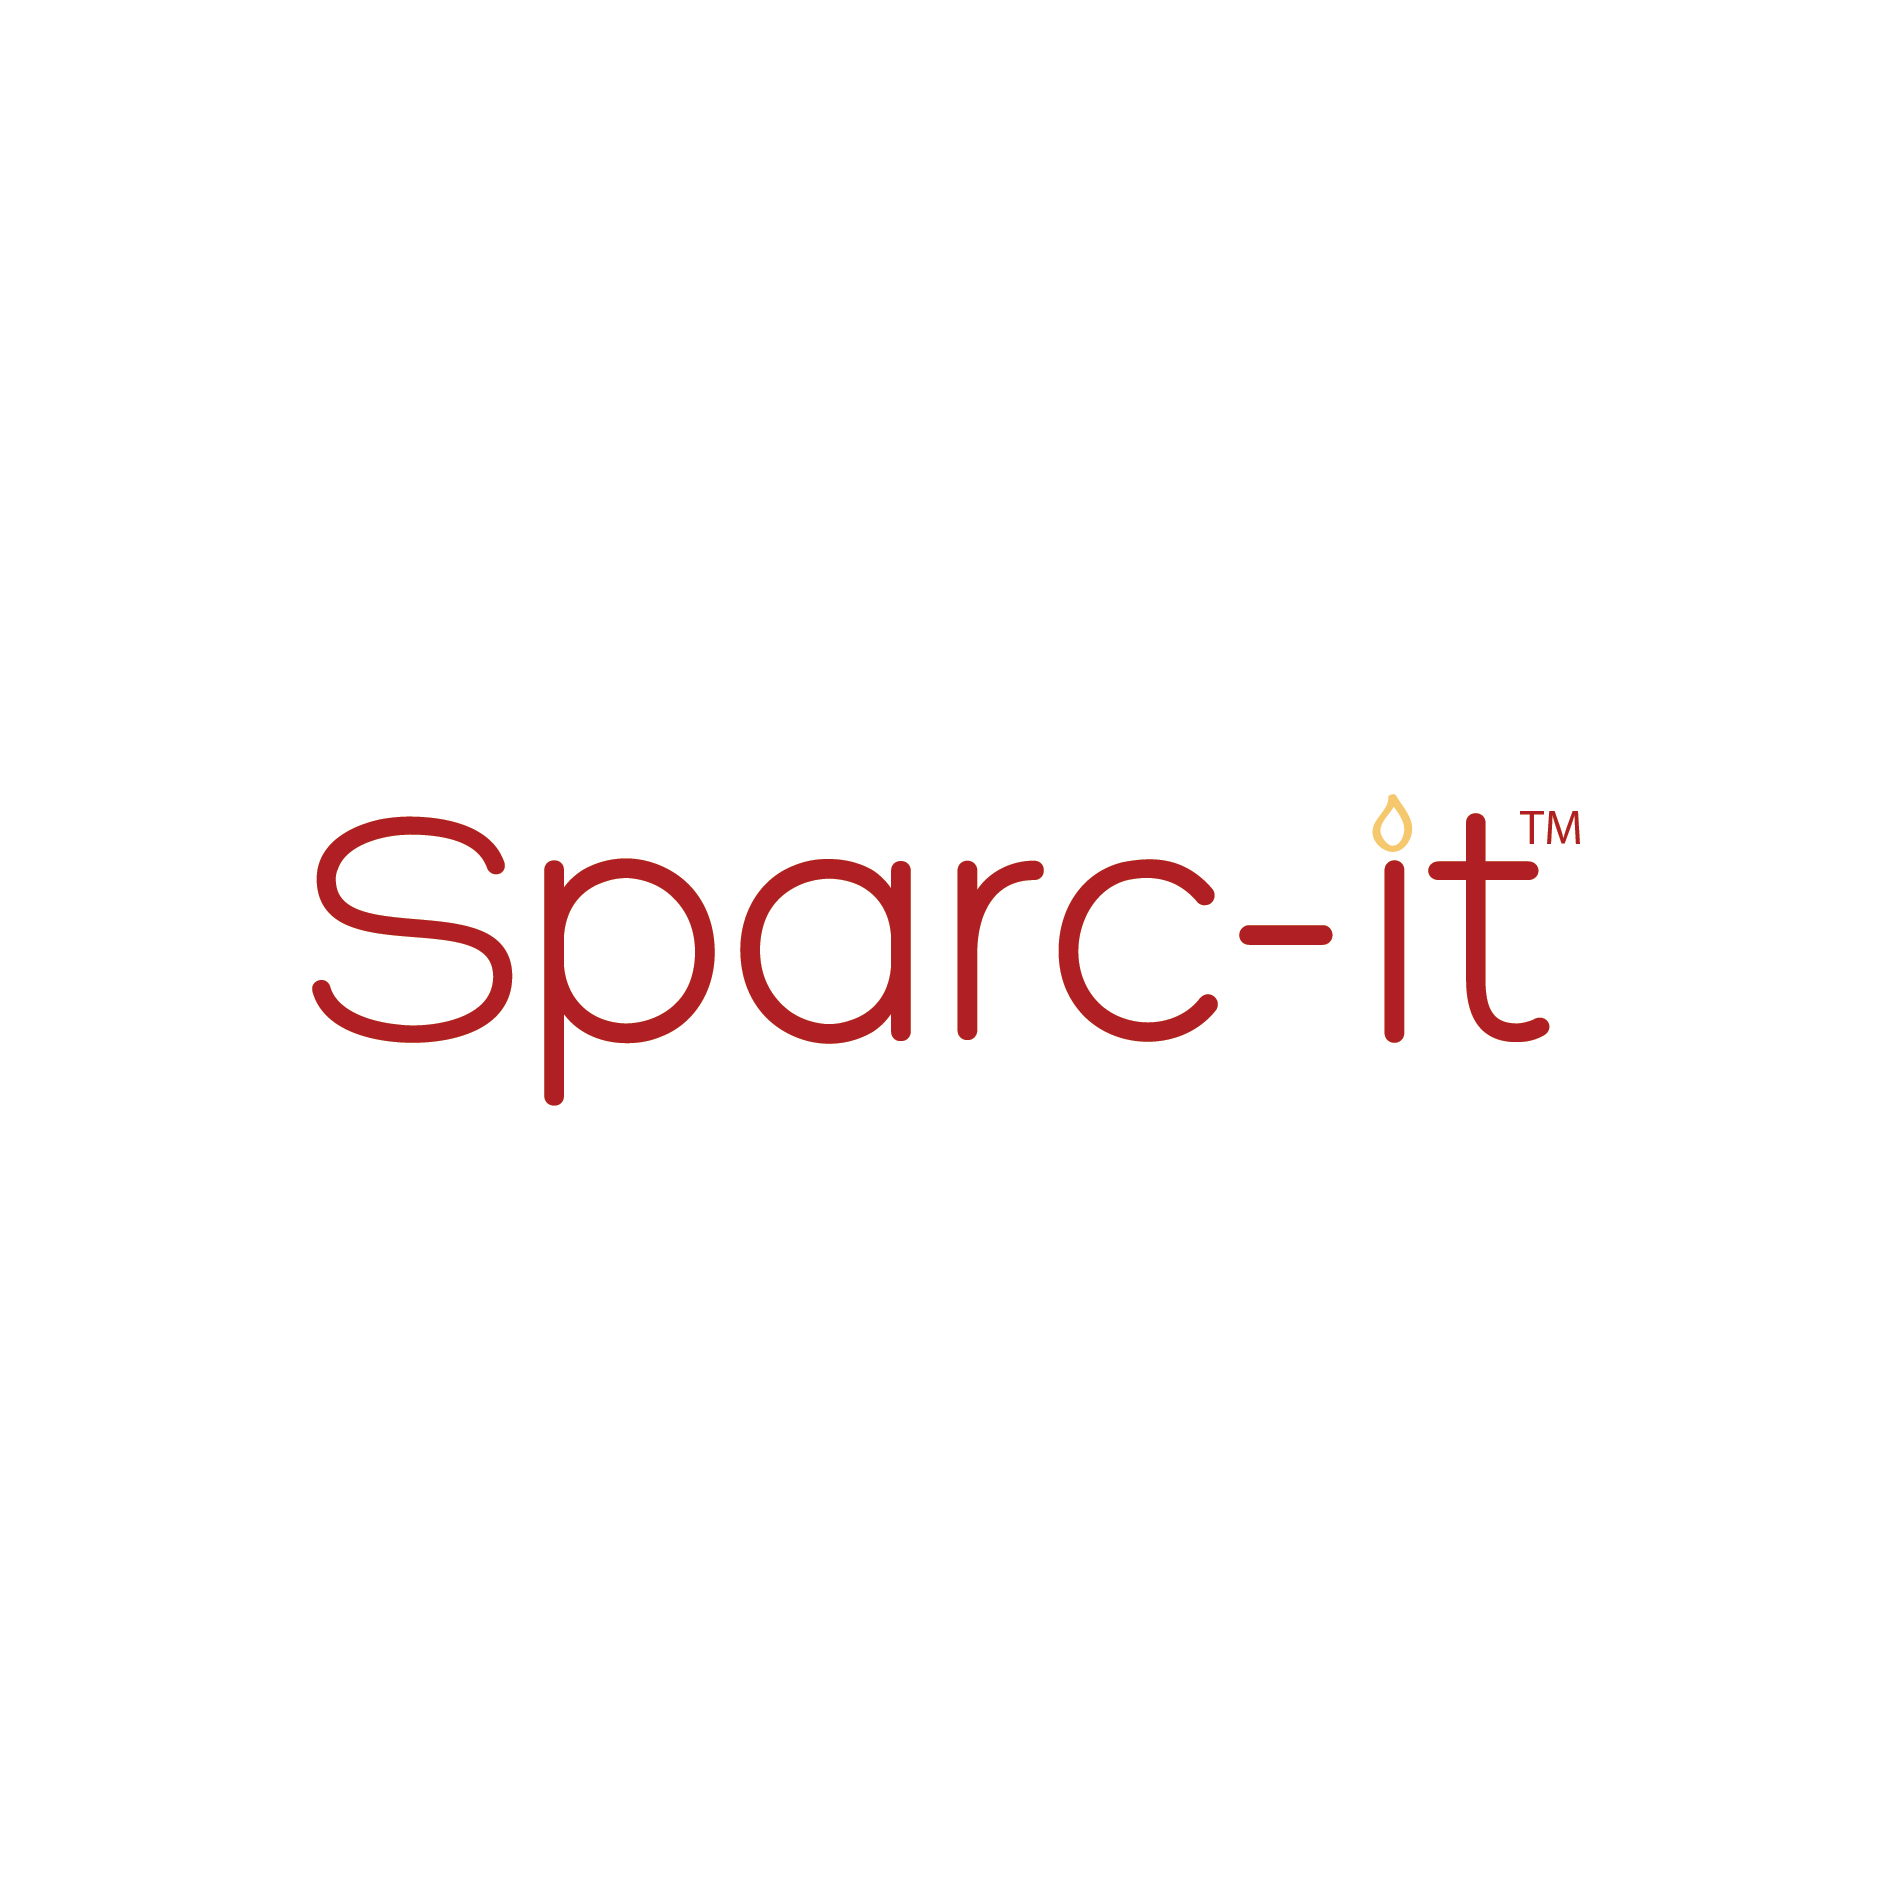 A logo for Sparc-it is shown in a modern red sans-serif font with a flame in place of the dot on the 